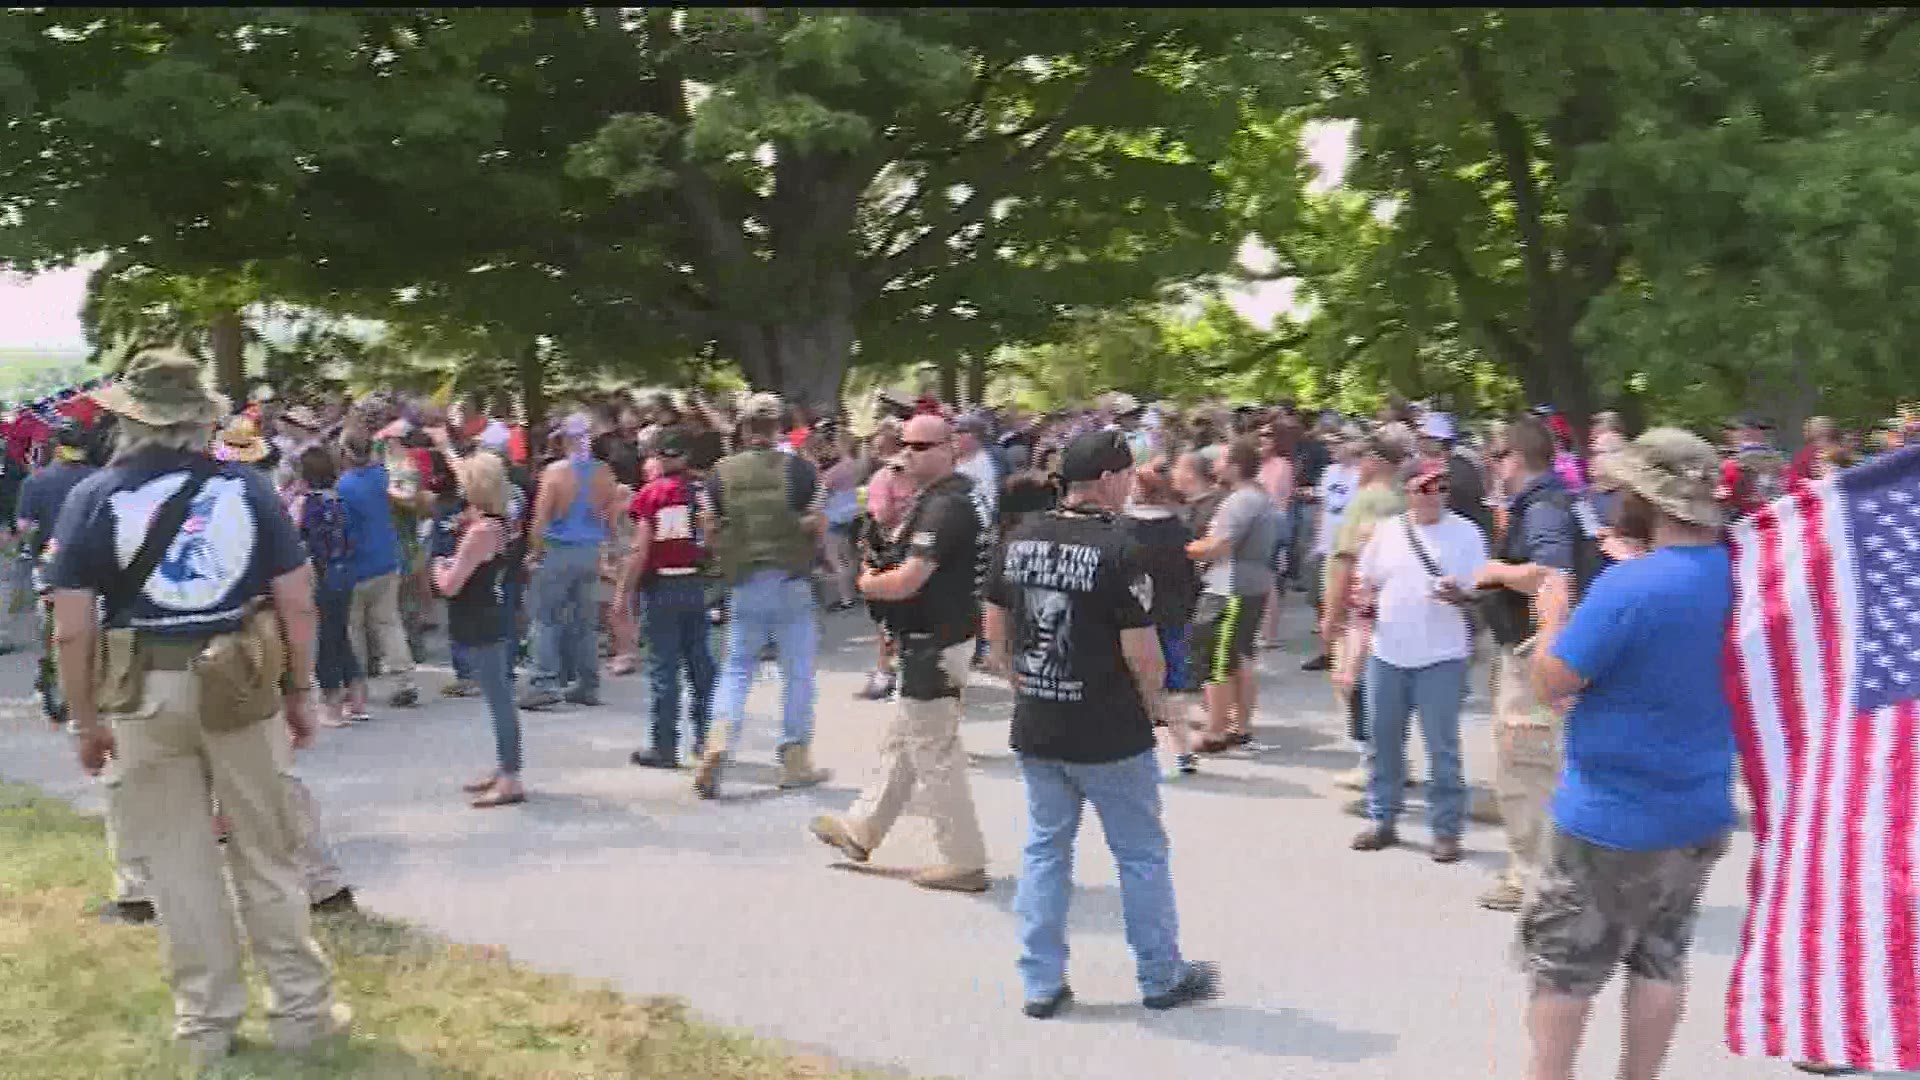 Rumors of a left-wing protest happening July 4 at Gettysburg National Military Park drew hundreds of right-wing counter-protesters.